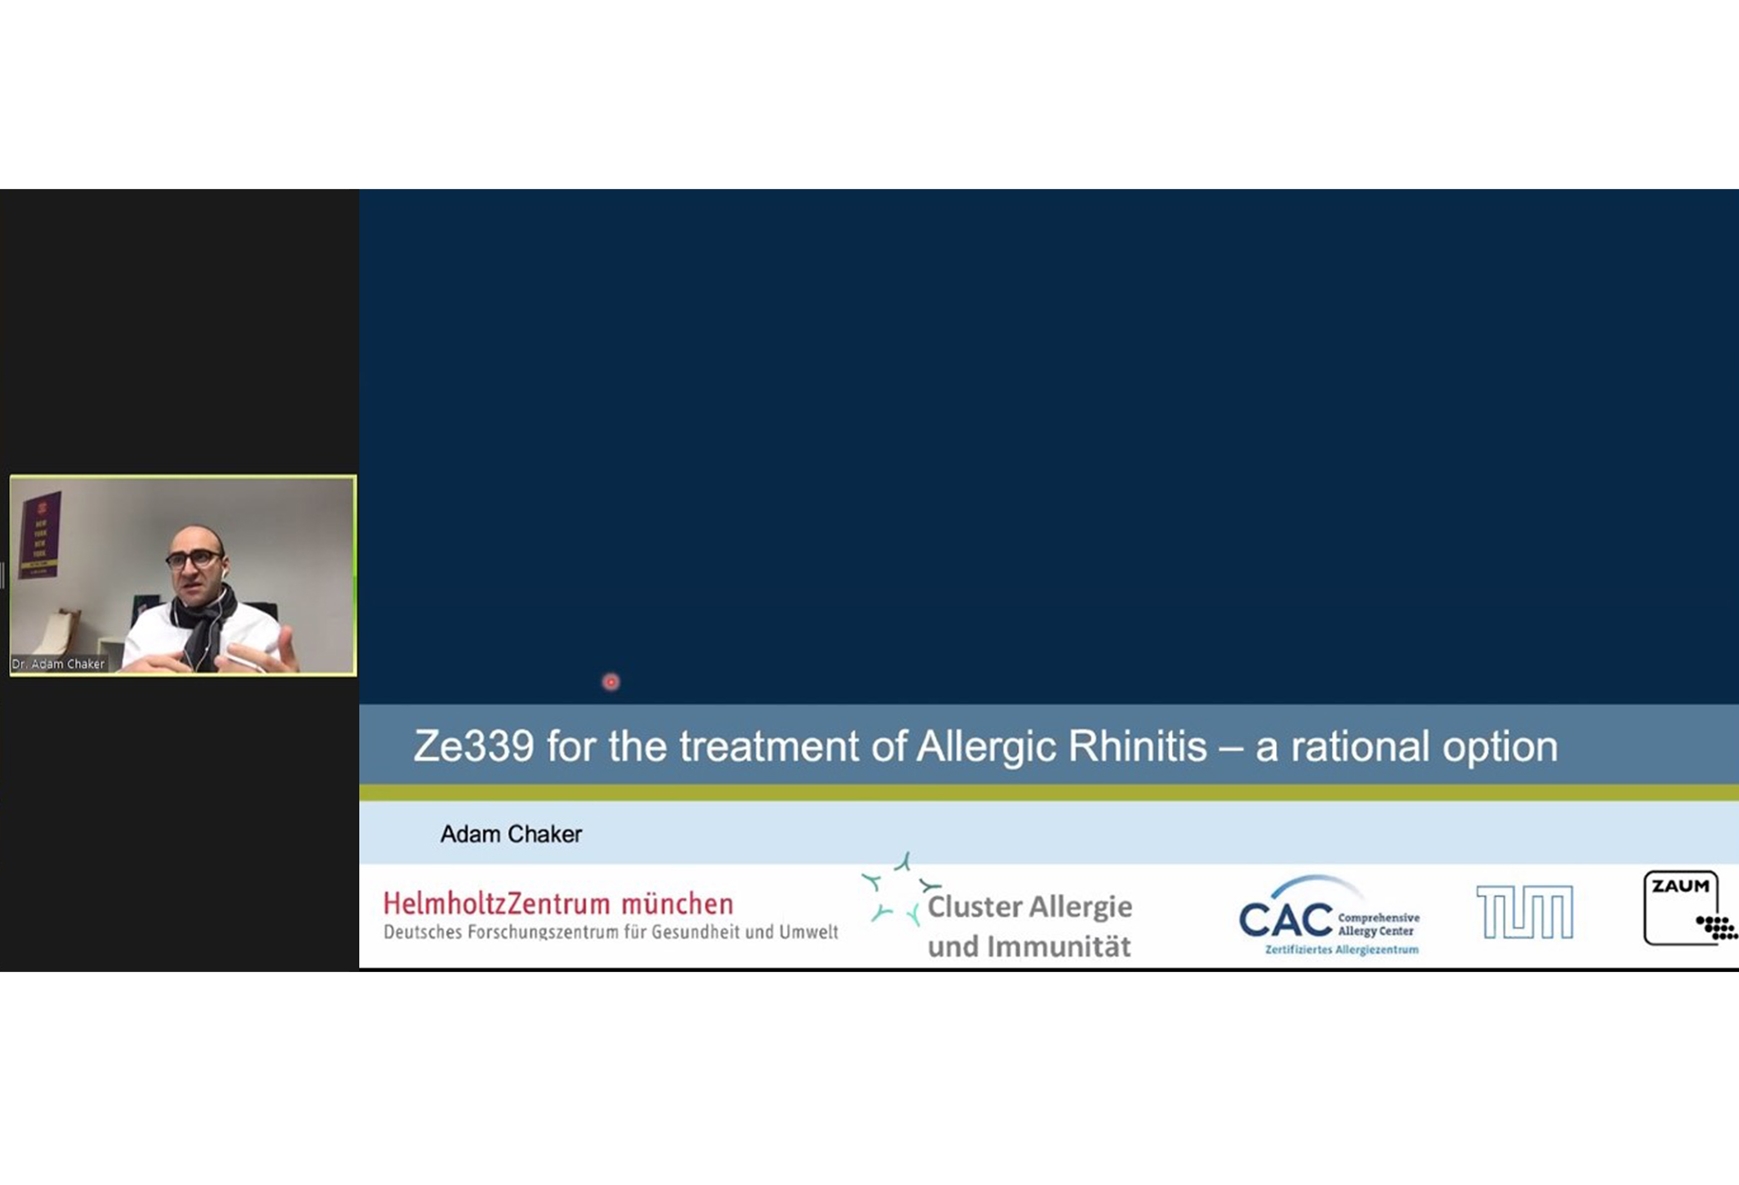 Webinar "Ze339 for the treatment of Allergic Rhinitis - a rational option"